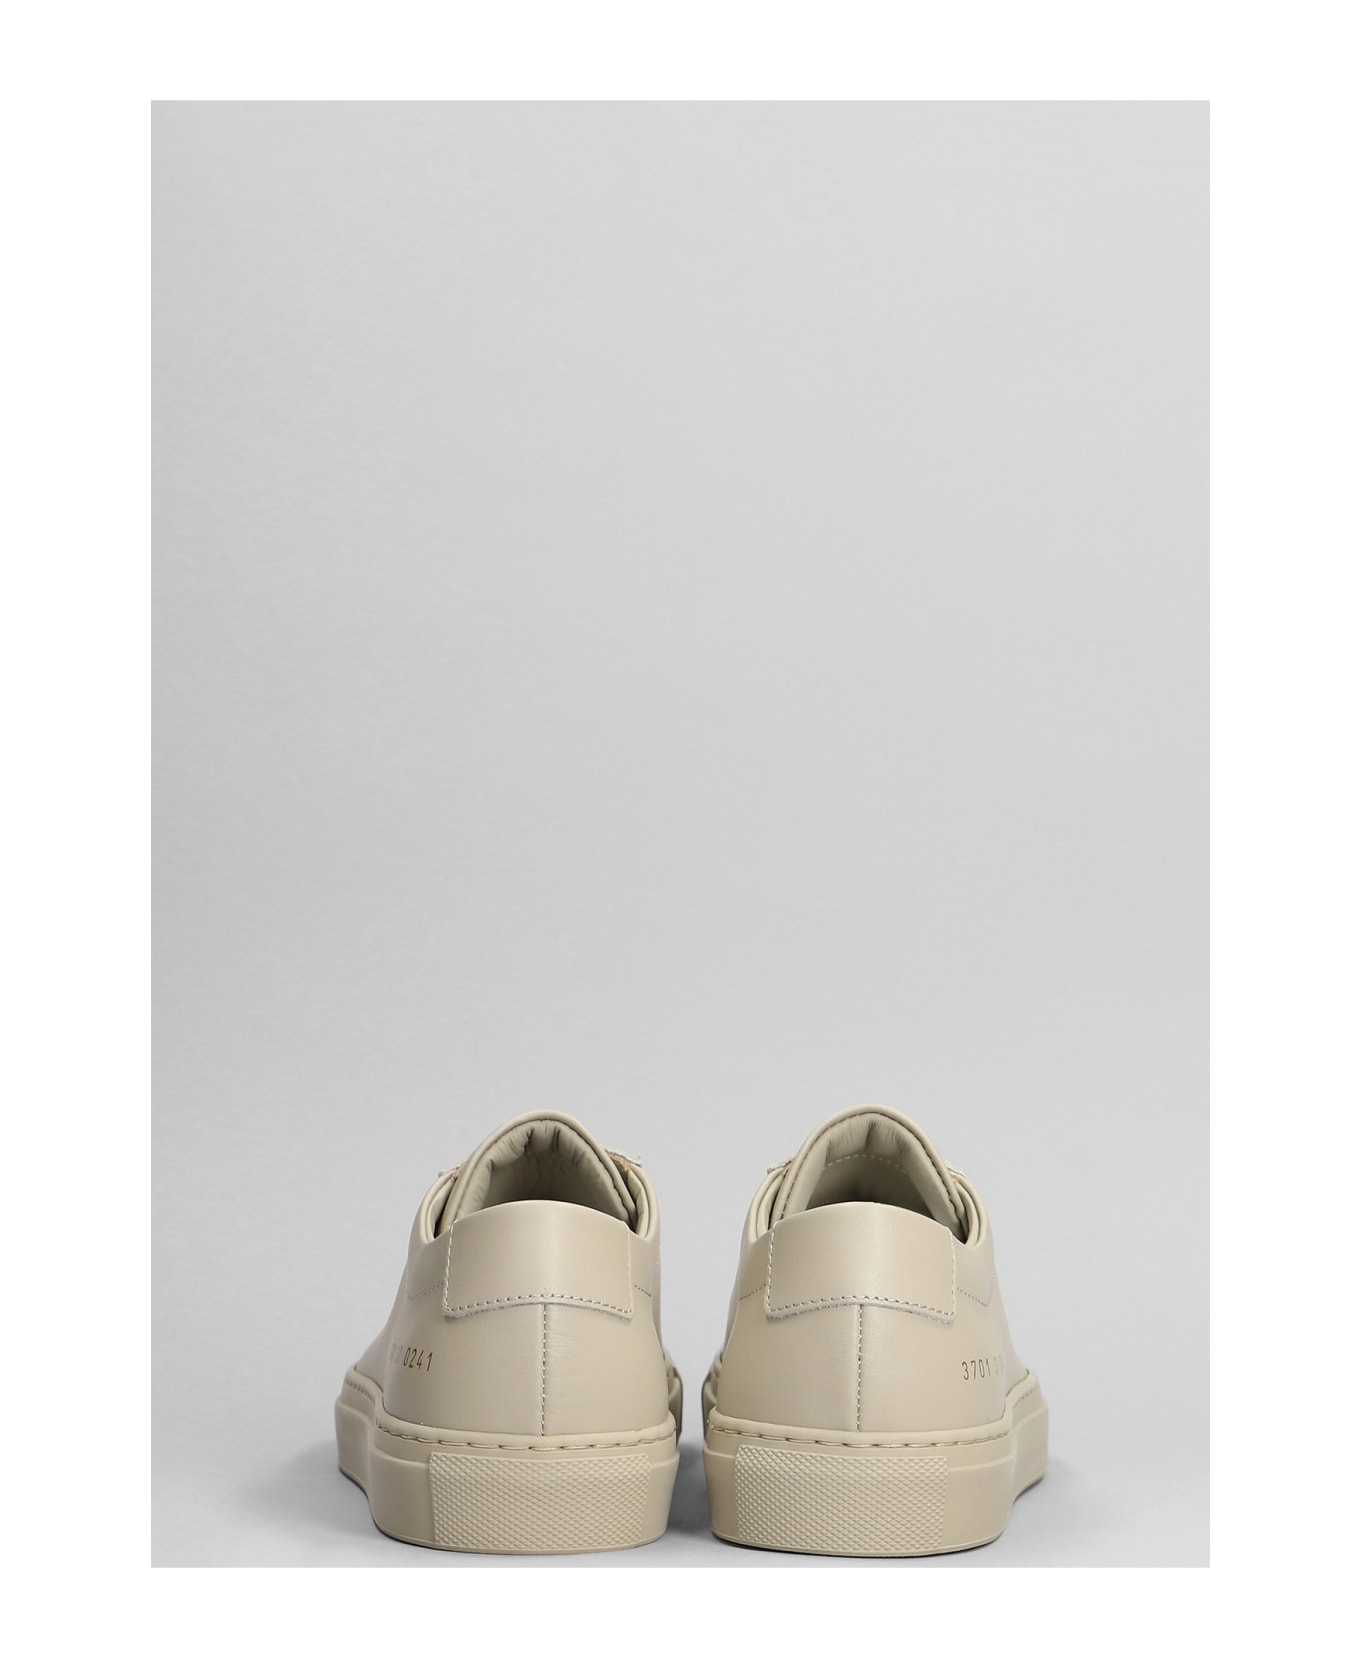 Common Projects Original Achilles Sneakers In Taupe Leather - taupe スニーカー